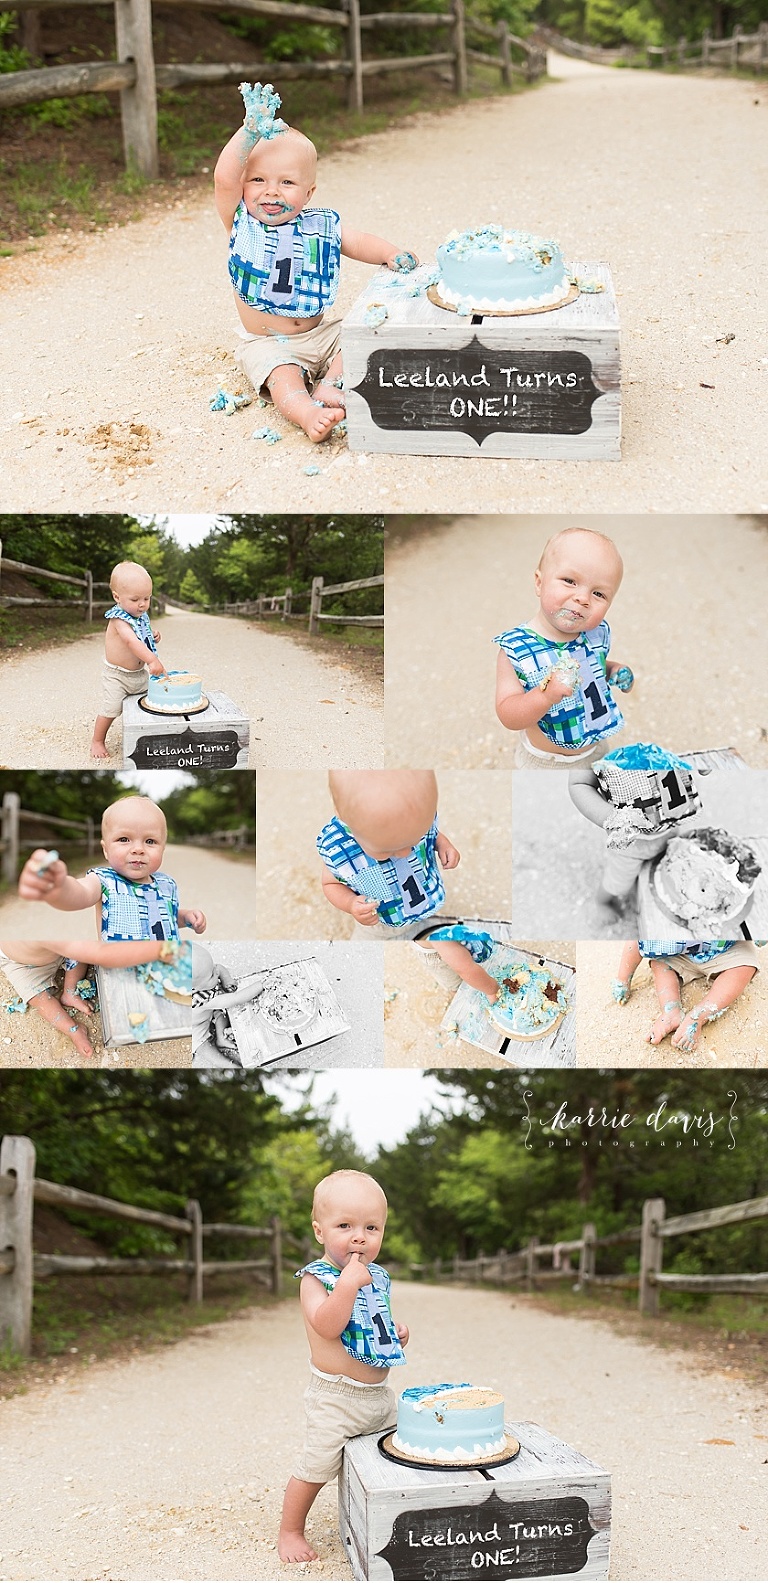 Cake smash ideas and pictures for boys. South Jersey baby photographer offering cake smash photo sessions and newborn portraits.